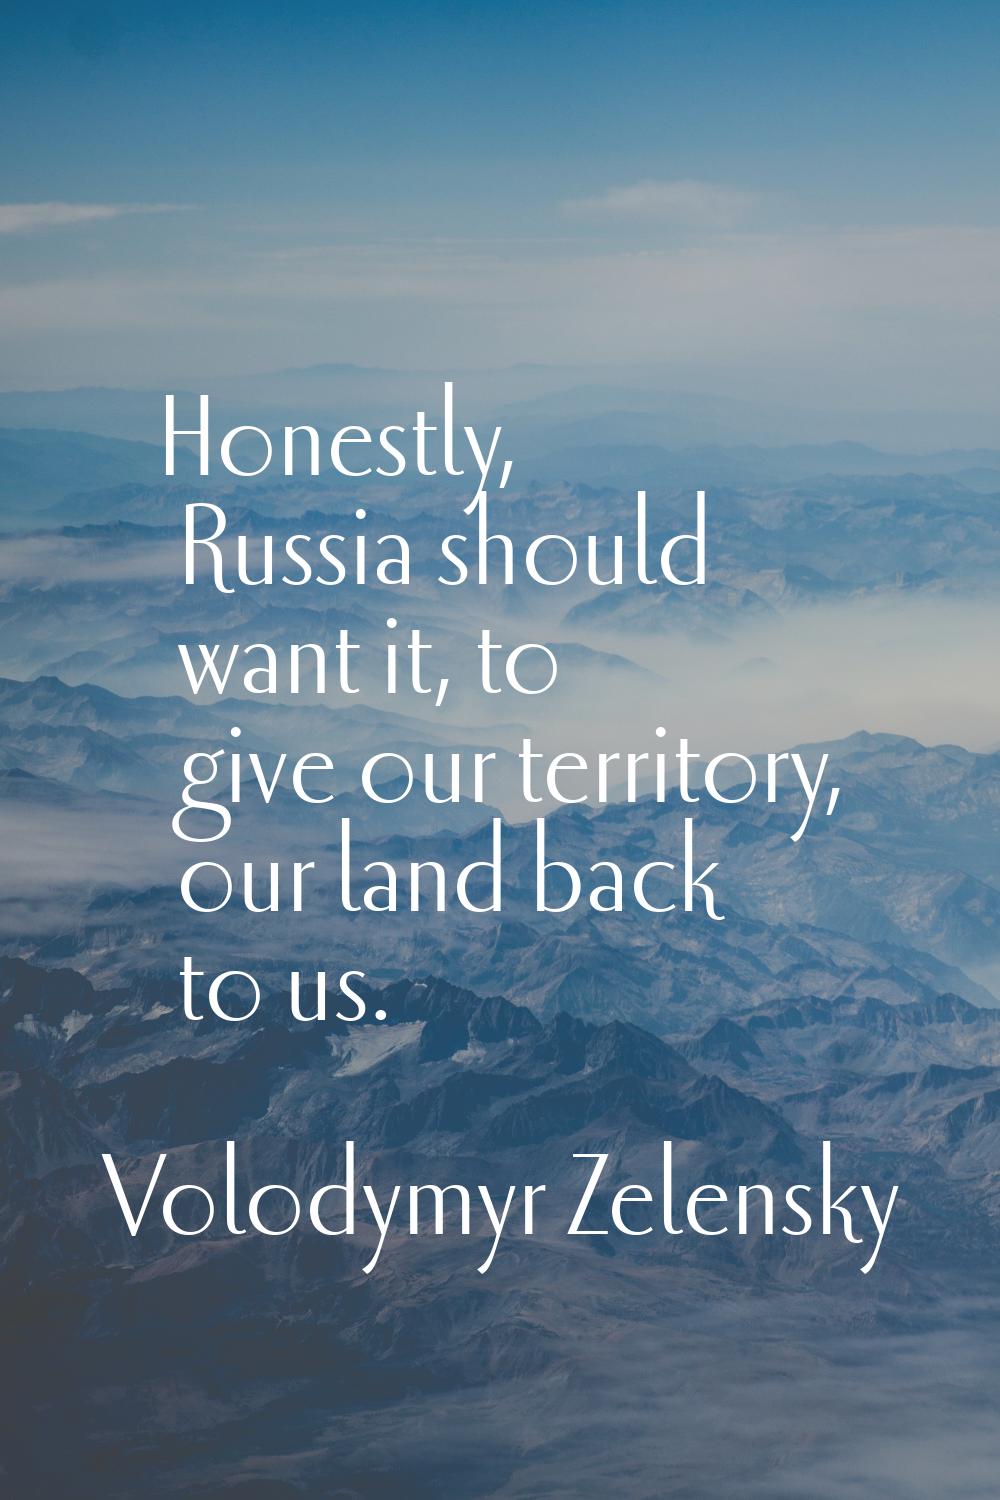 Honestly, Russia should want it, to give our territory, our land back to us.